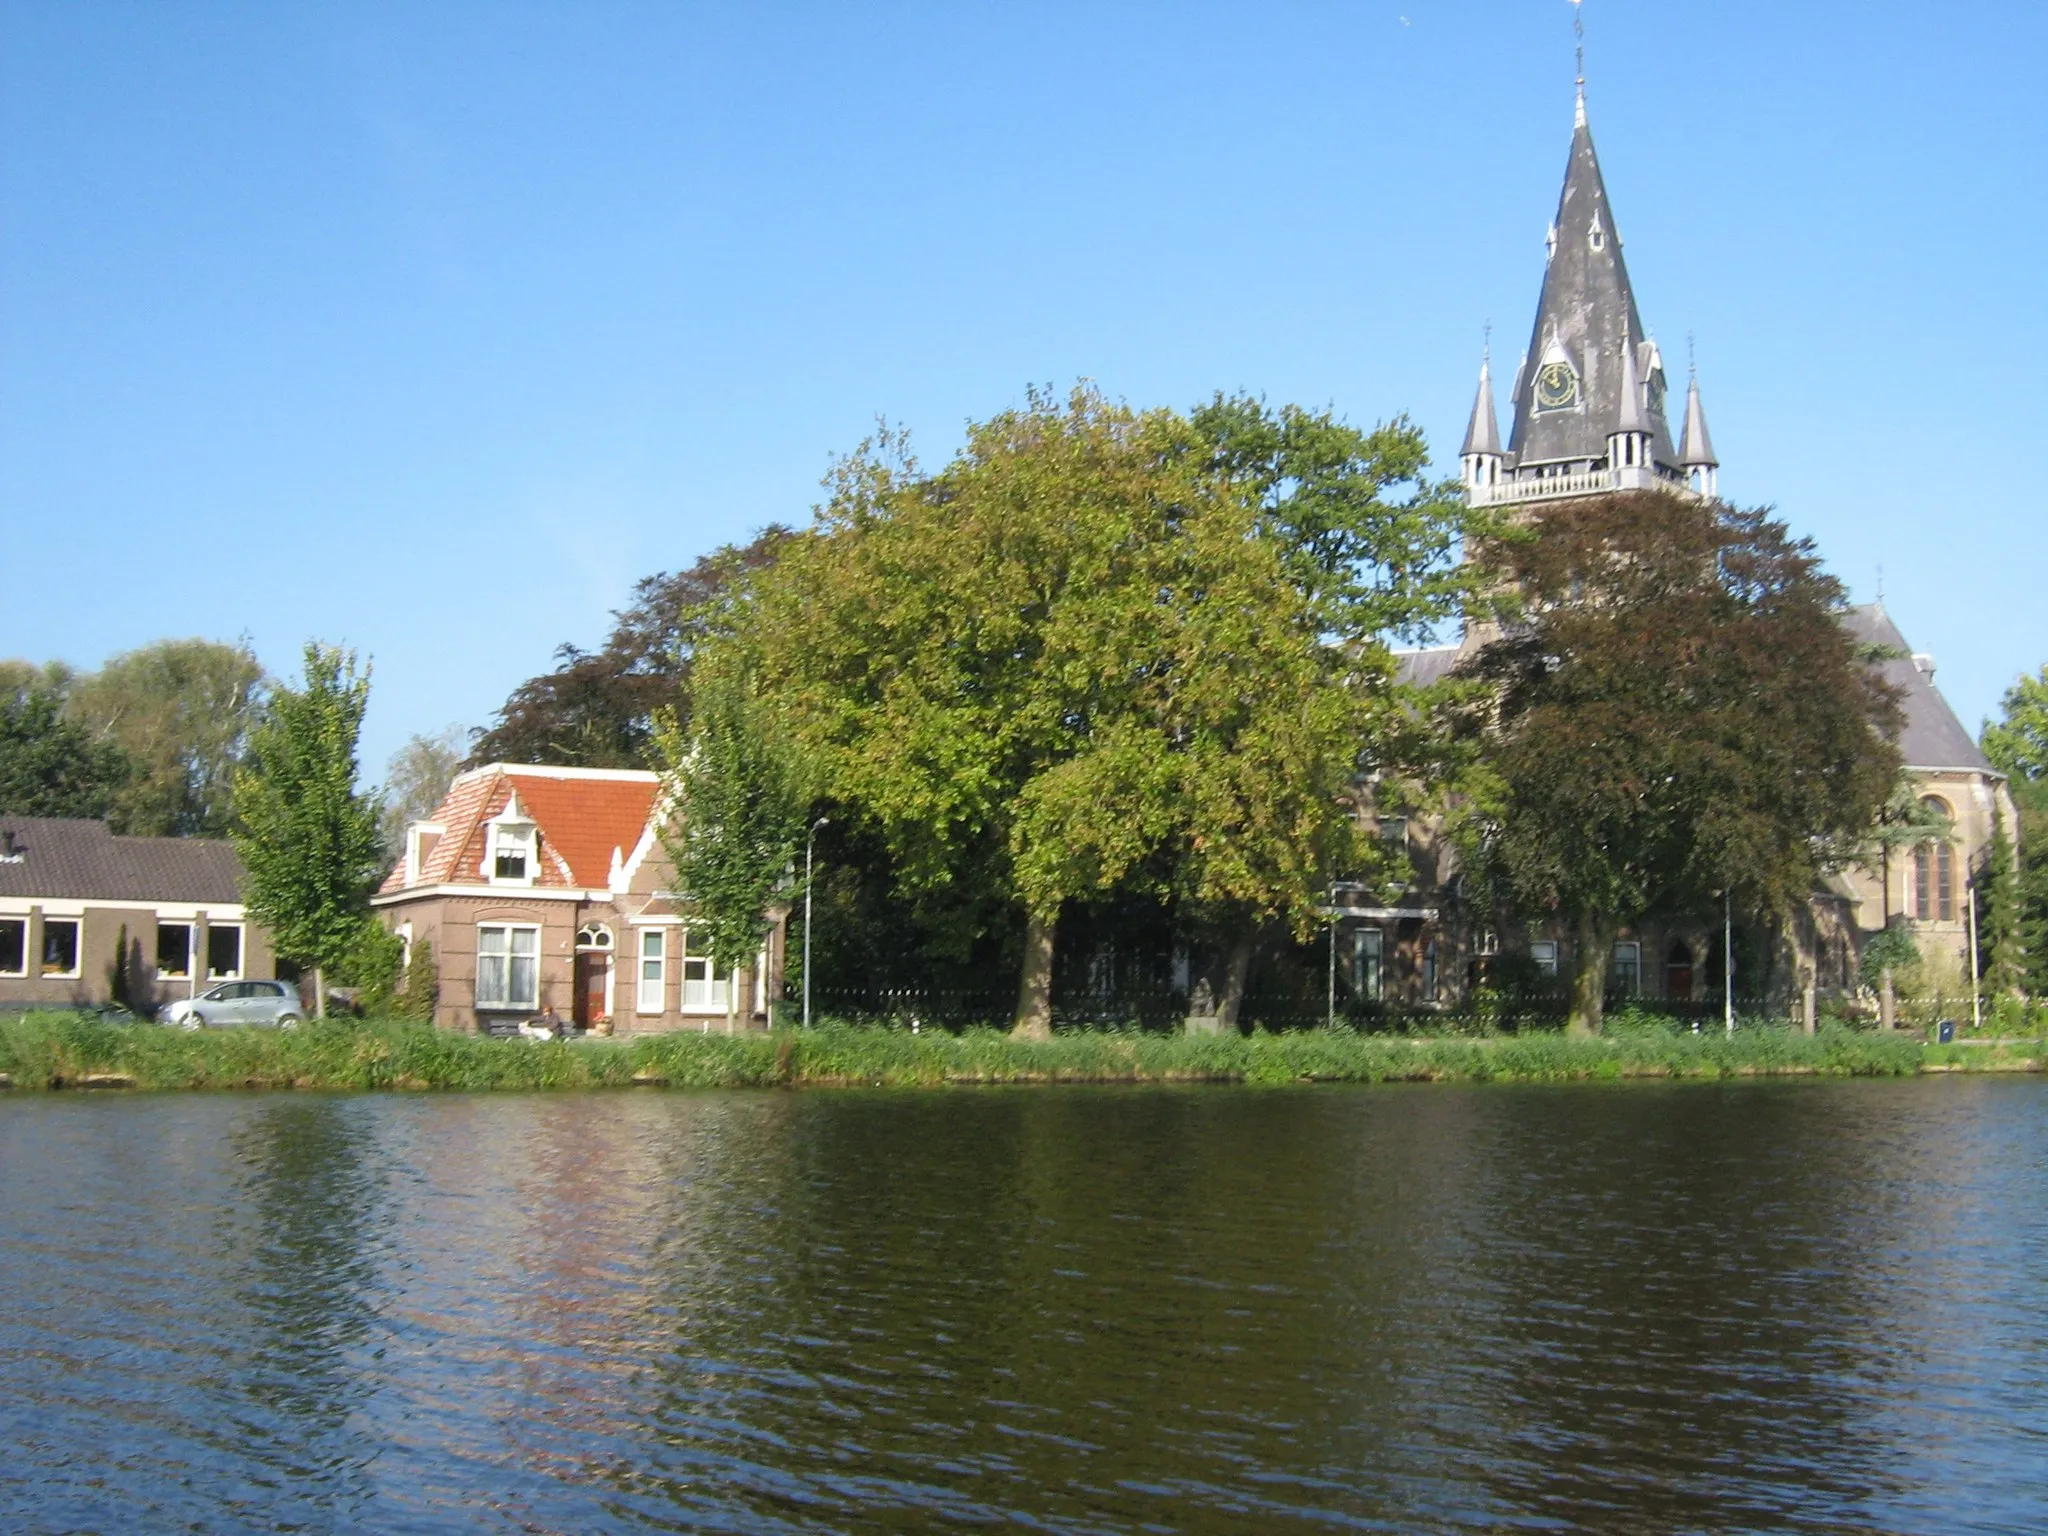 Photo showing: View of Nes aan de Amstel, a village in the municipality of Amstelveen, the Netherlands. The water in the foreground is the river Amstel. Photograph taken from the east on October 6 2007 by the uploader, who has donated it to the public domain.